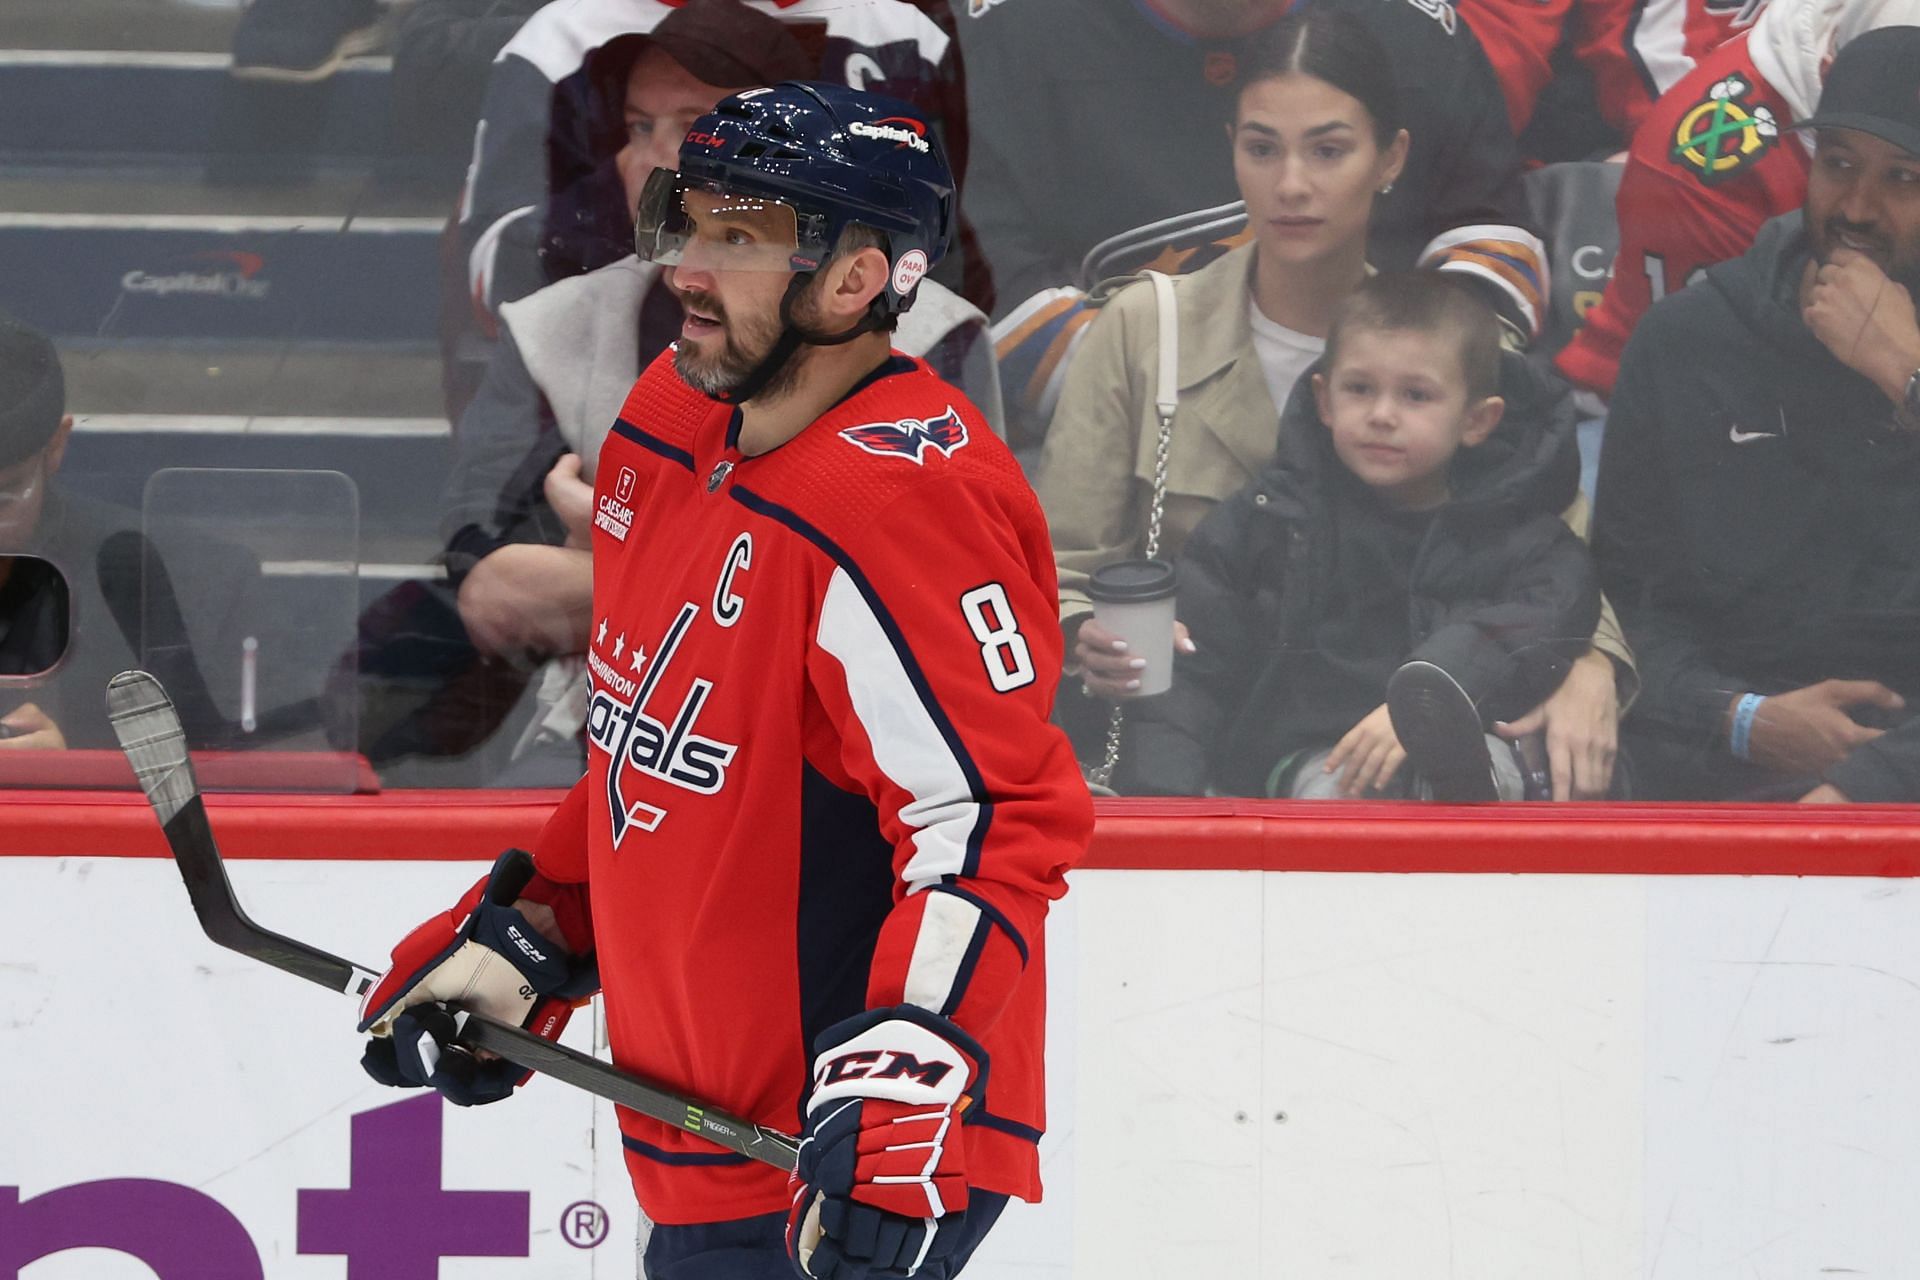 Alexander Ovechkin remains one of the best in the NHL